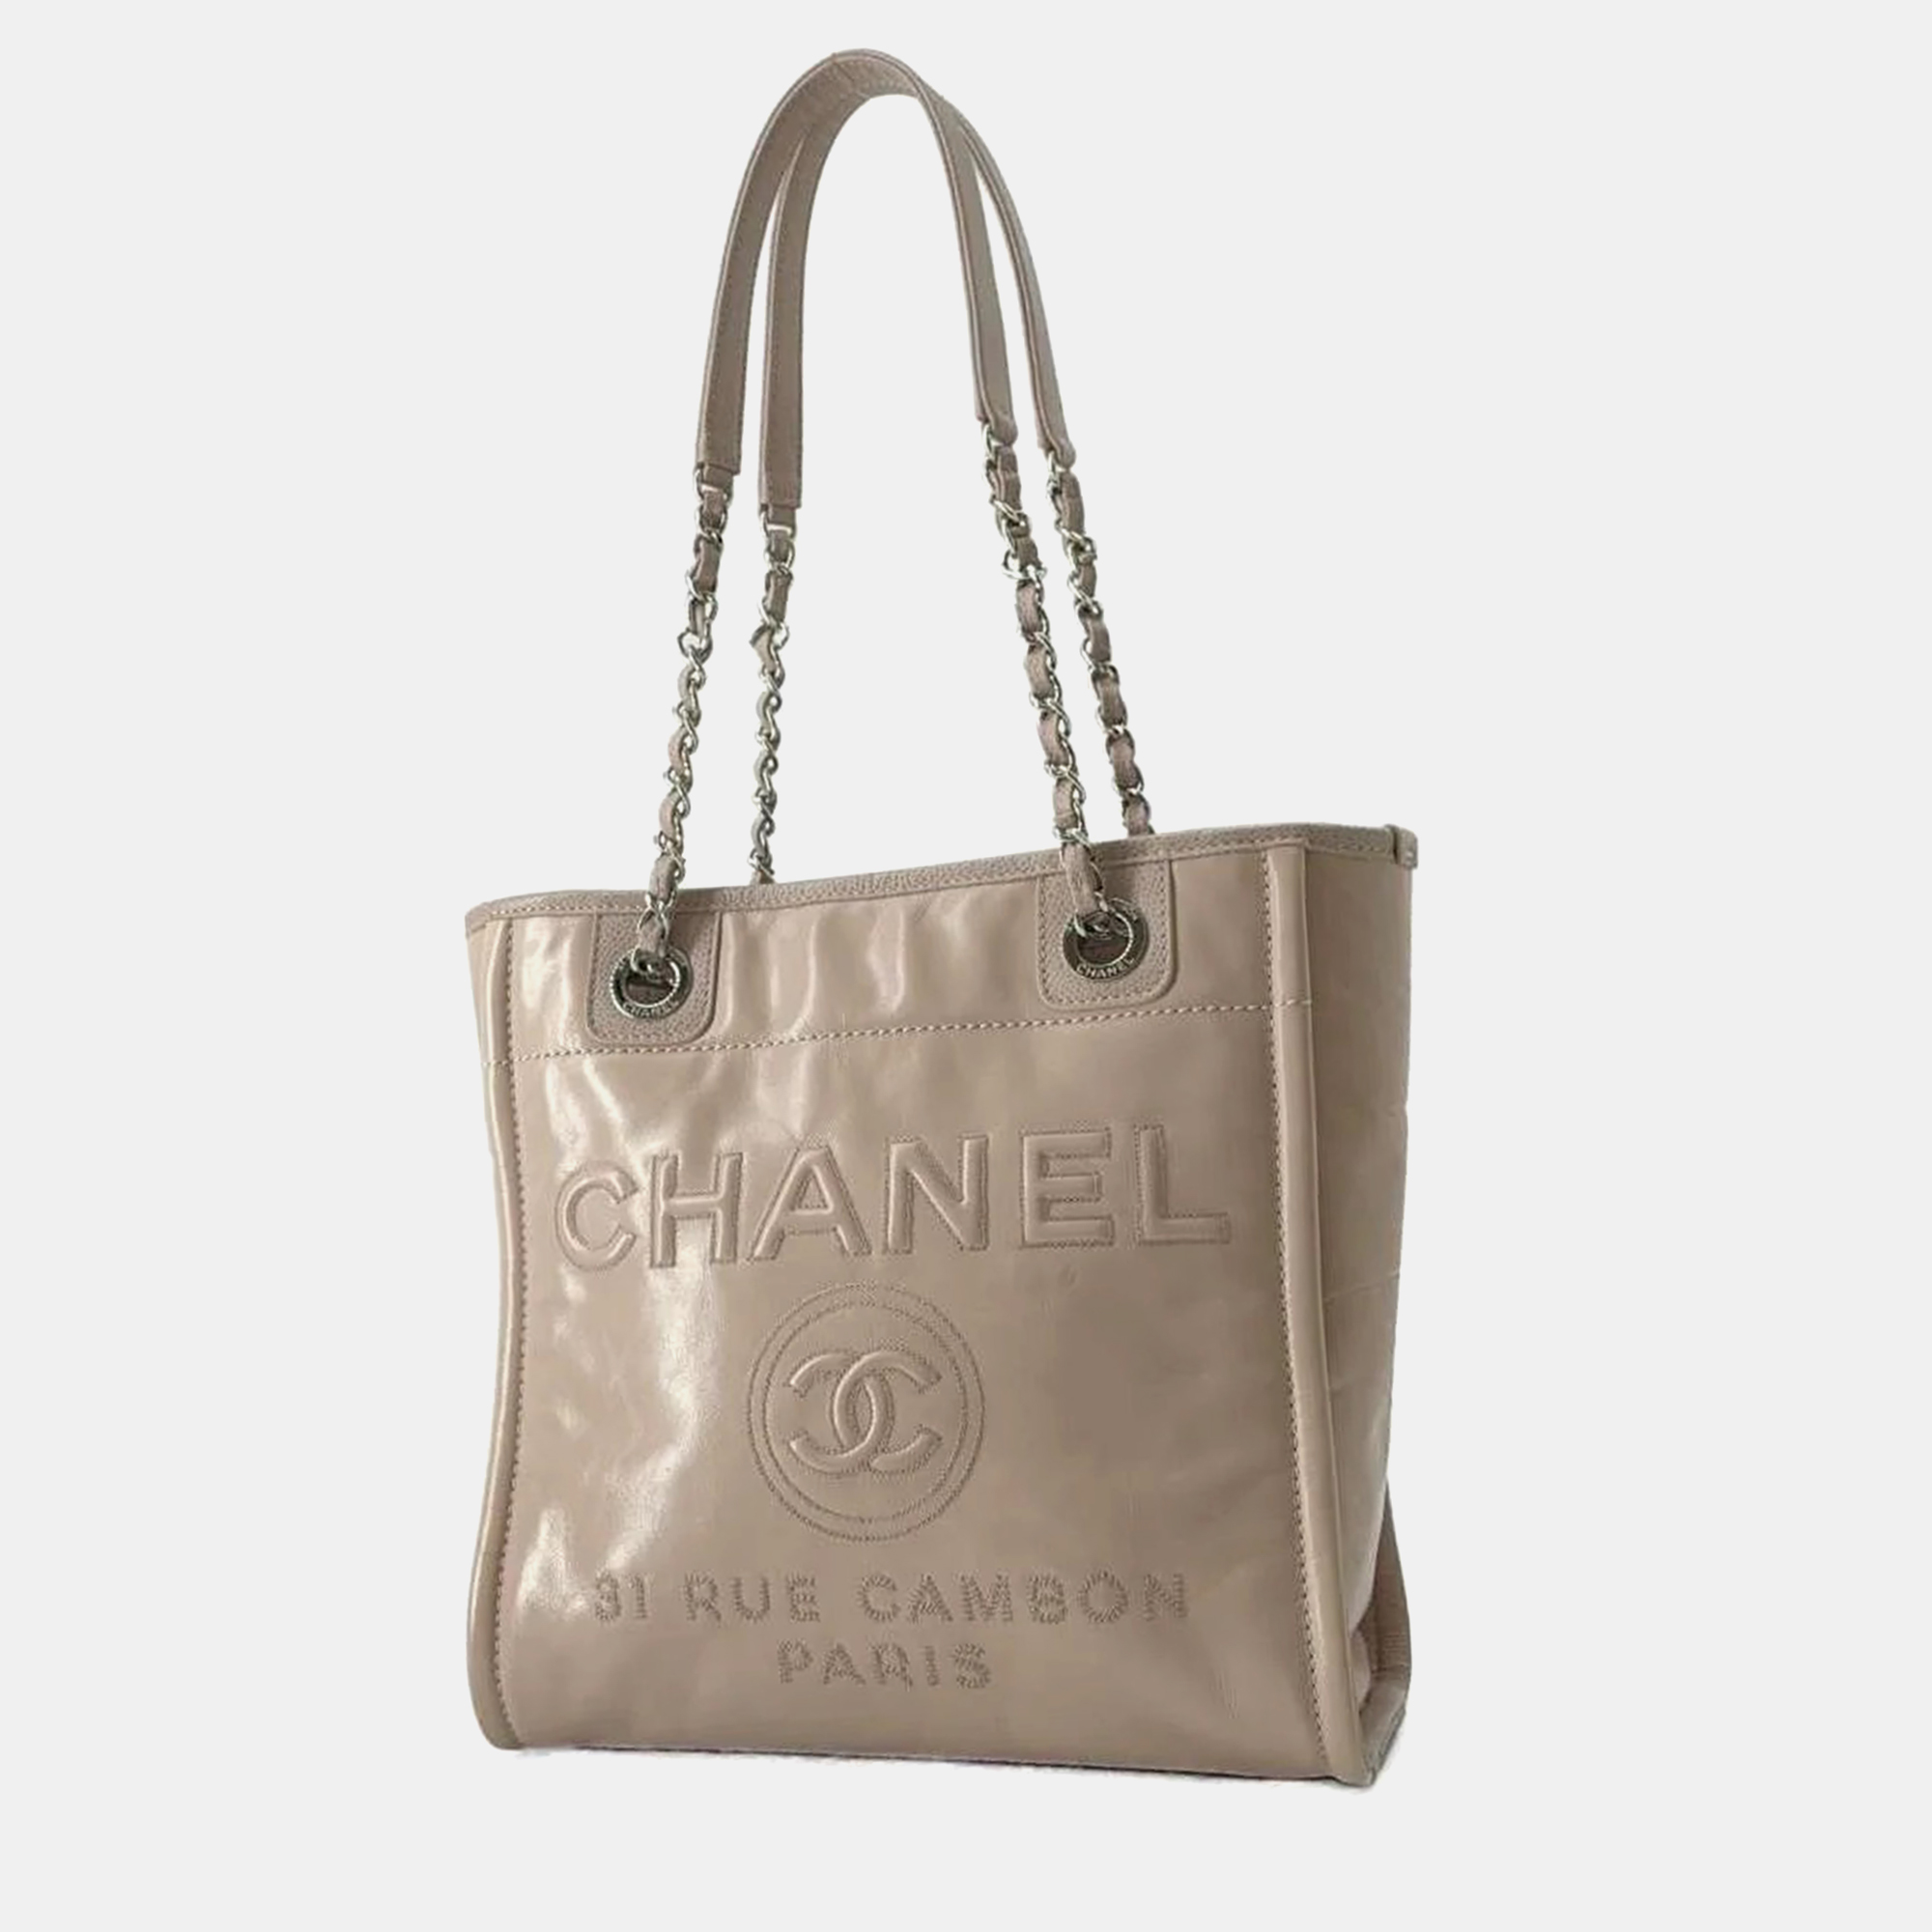 Chanel pink  leather small deauville totes